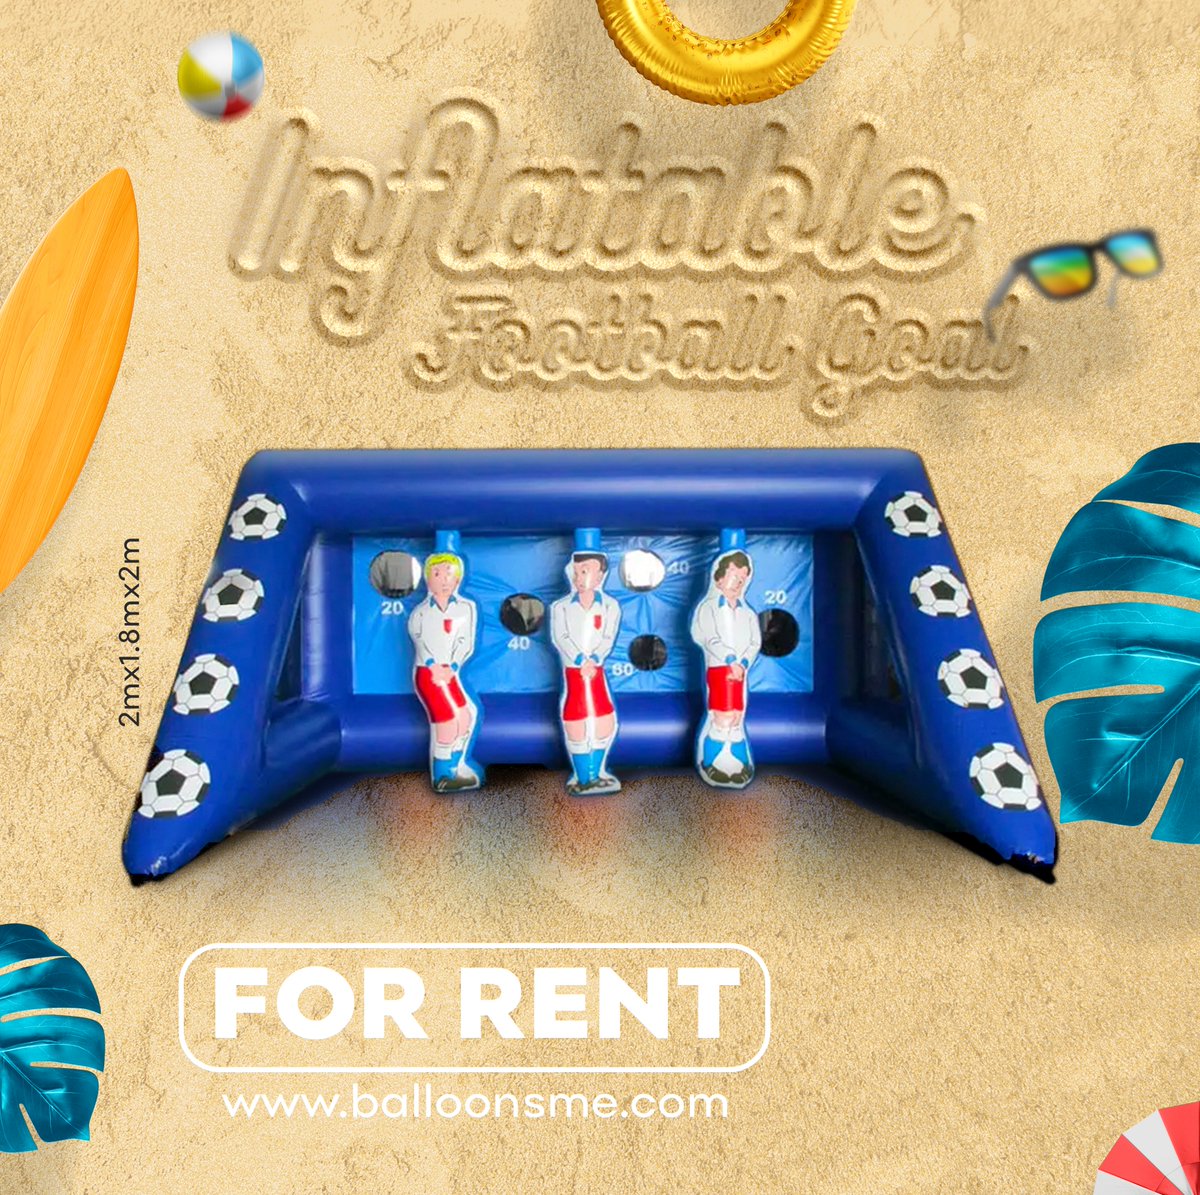 Jump into endless fun this summer with our Inflatable Football Goal! Perfect for kids and adults alike.

balloonsme.com

#inflatables #games #events #kidsactivities #bouncingcastle #eventactivities #summergames #summersale #summer #funtime #rentalitems #abūdhabī